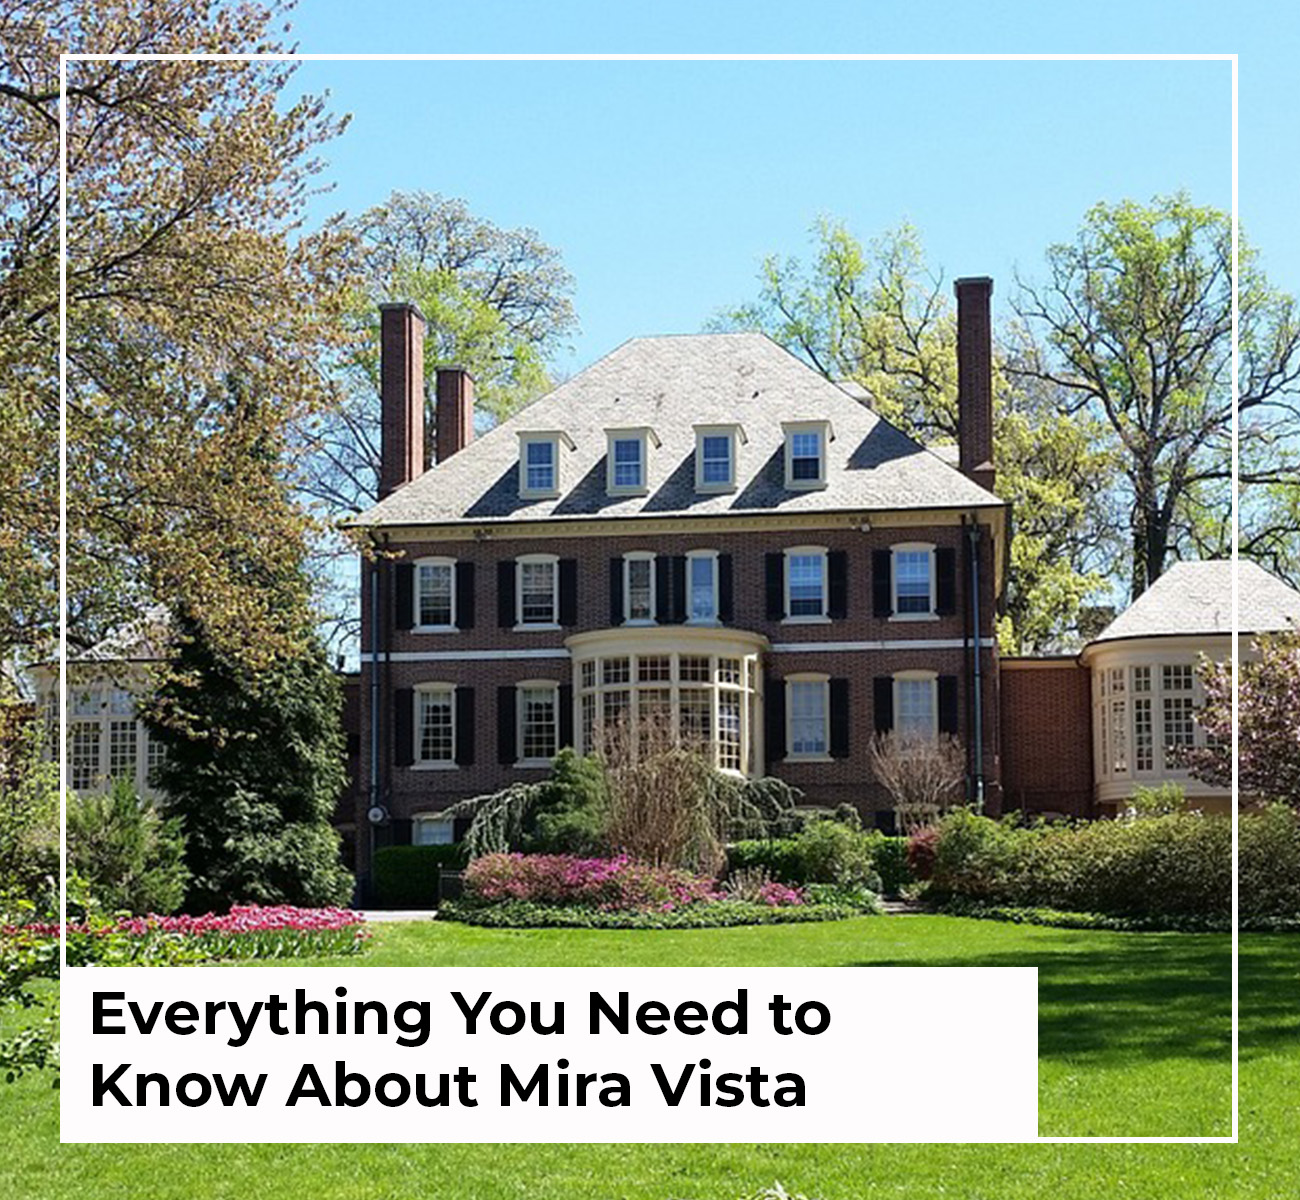 Everything You Need to Know About Mira Vista